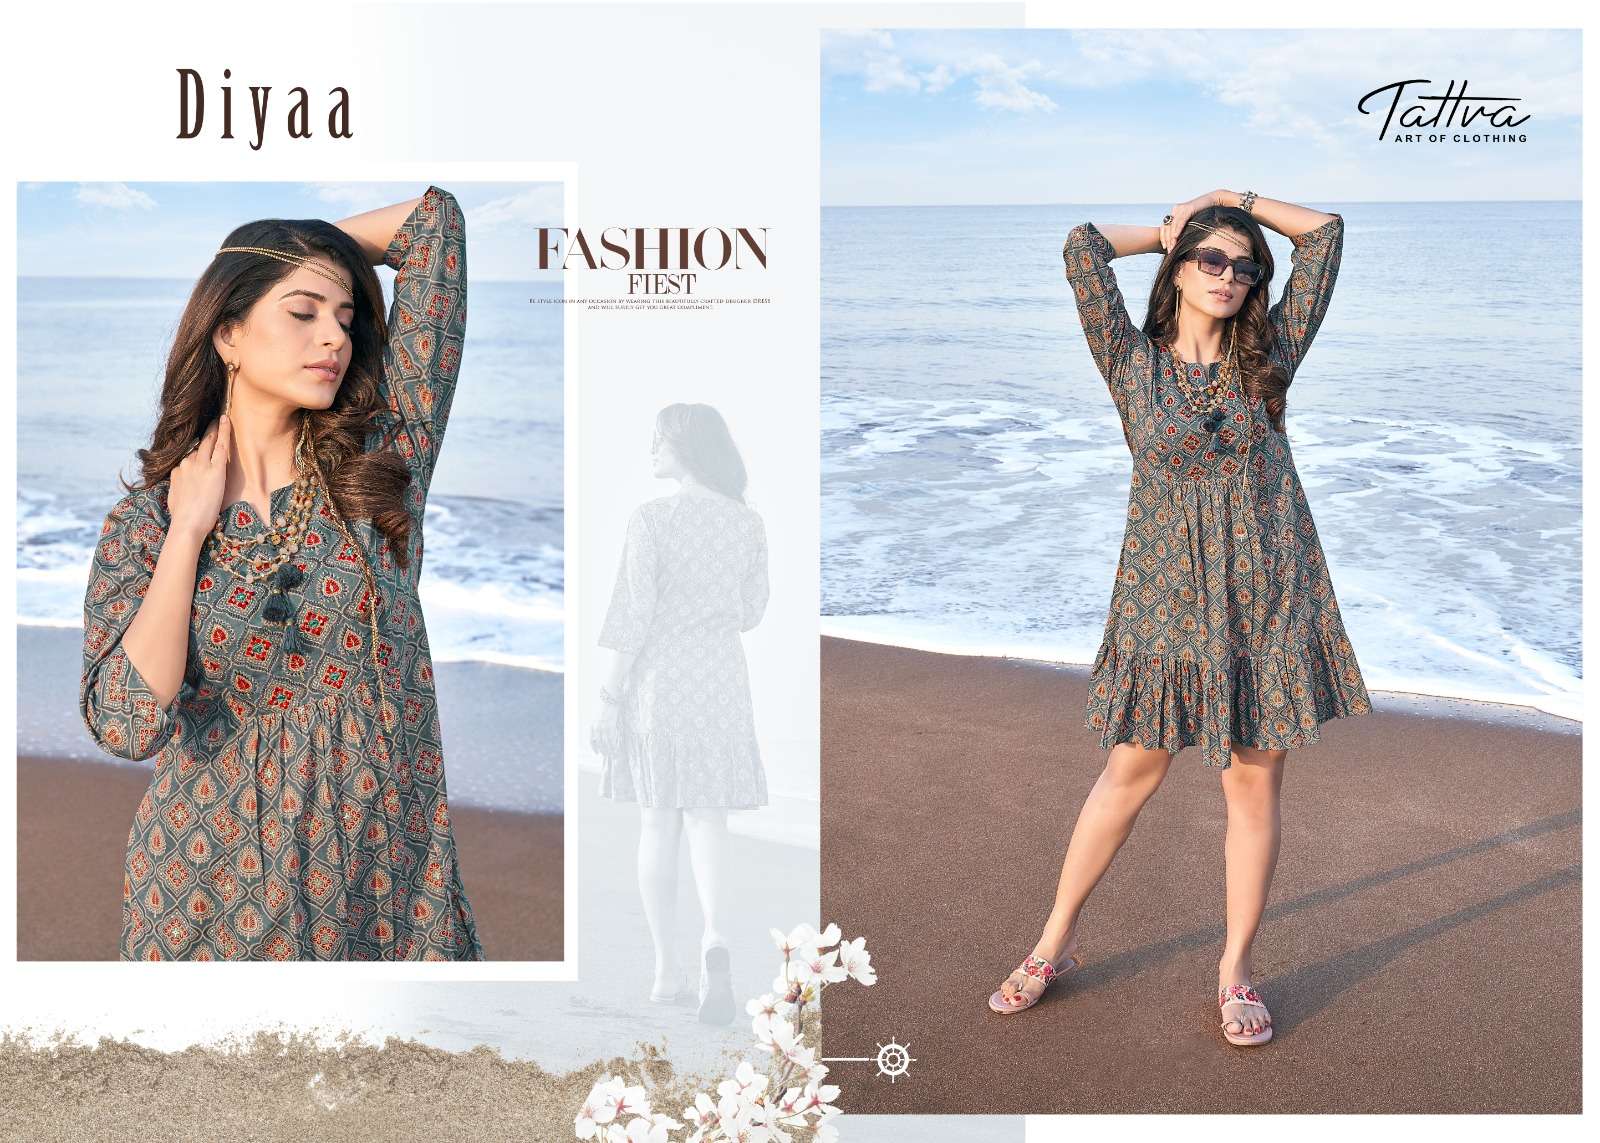 Style Loft By Tattva 01 To 05 Series Designer Stylish Fancy Colorful Beautiful Party Wear & Ethnic Wear Collection Soft Cotton Kurtis At Wholesale Price